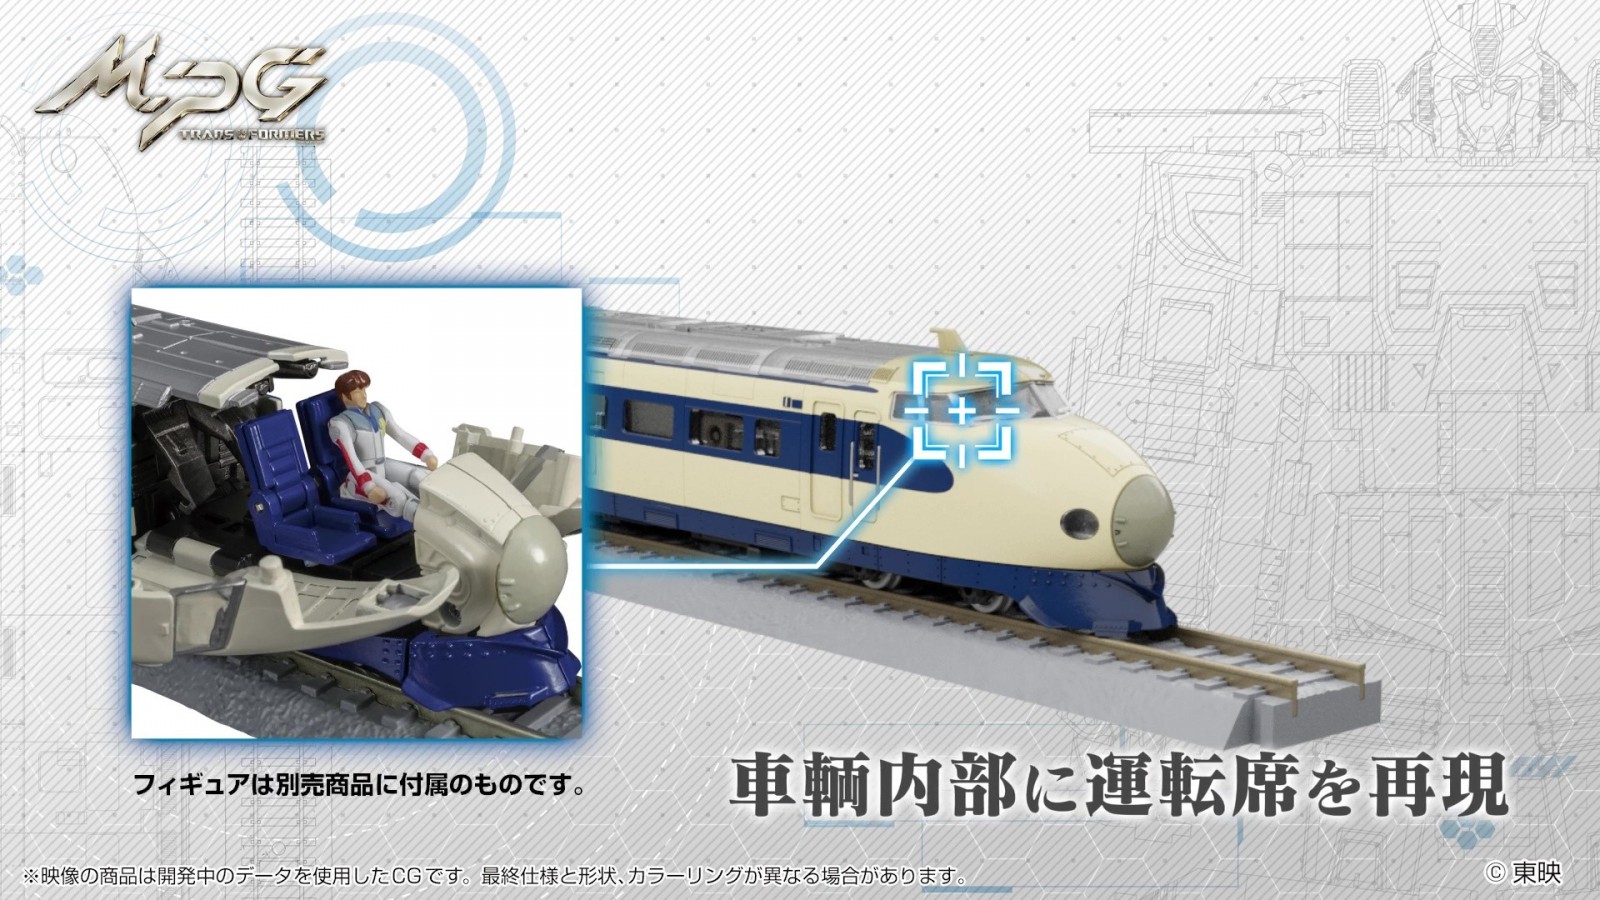 Transformers News: Scale and Features of MPG 01 Trainbot Shouki Shown in New Video from Takara